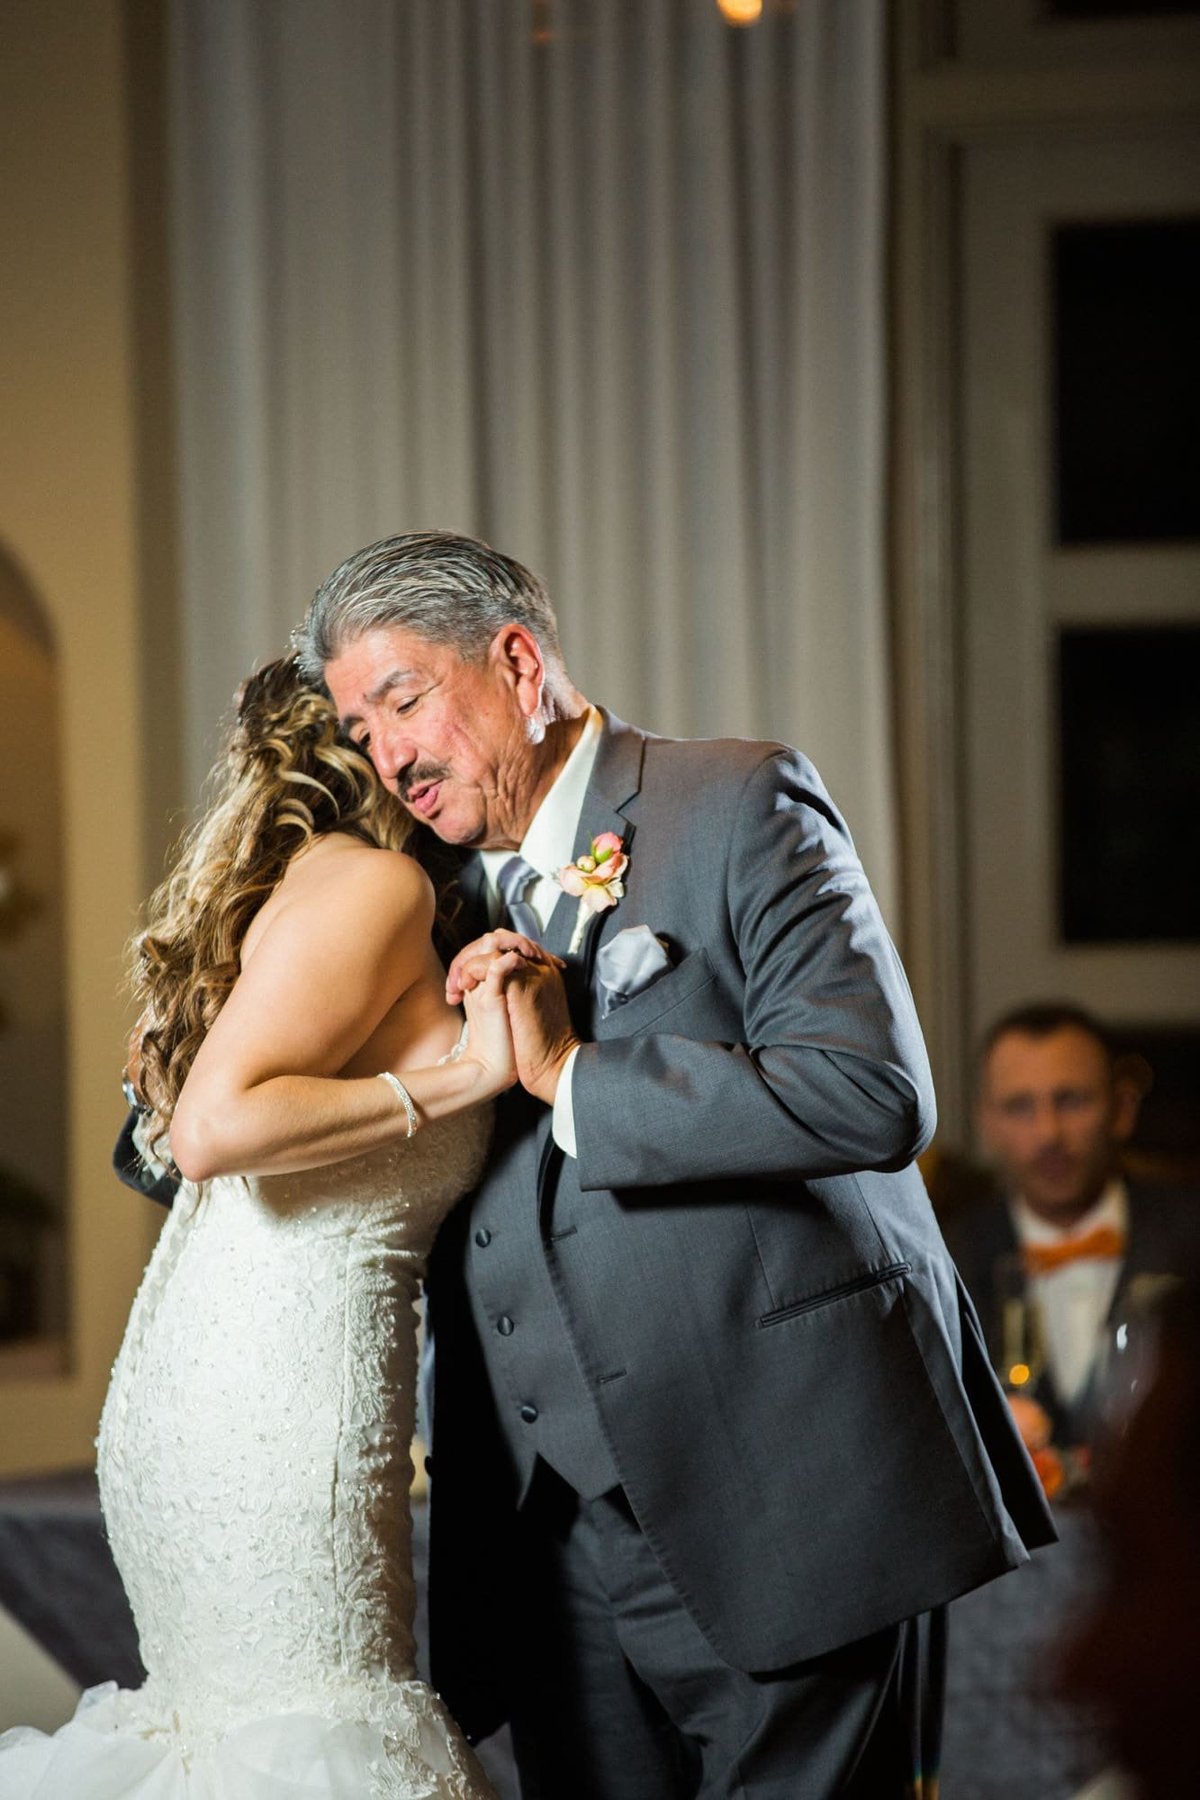 Father of the Bride dances with his daughter at her wedding